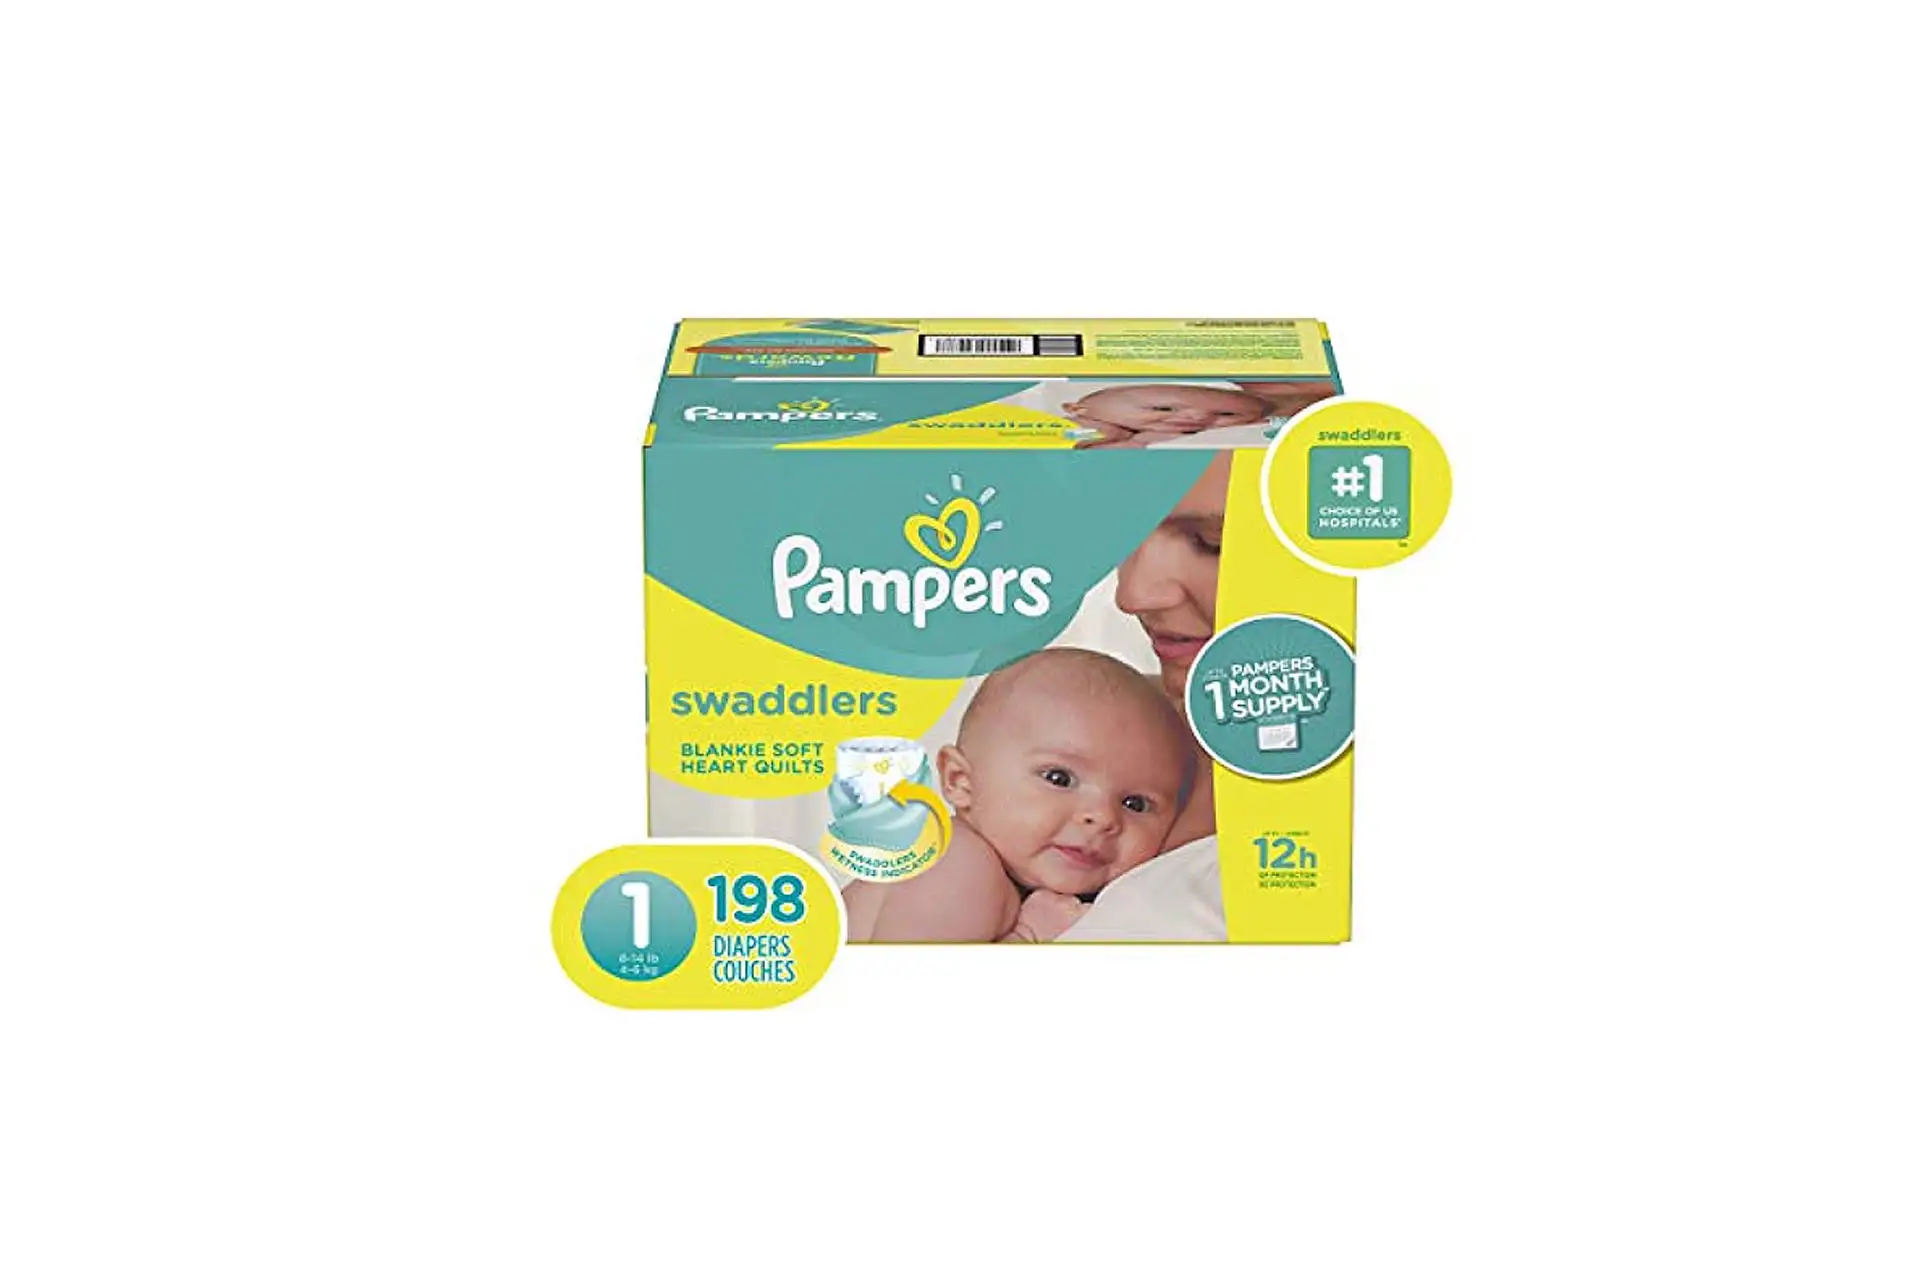 https://www.familyvacationcritic.com/wp-content/webp-express/webp-images/doc-root/wp-content/uploads/sites/19/2019/01/PampersDiapers.jpg.webp